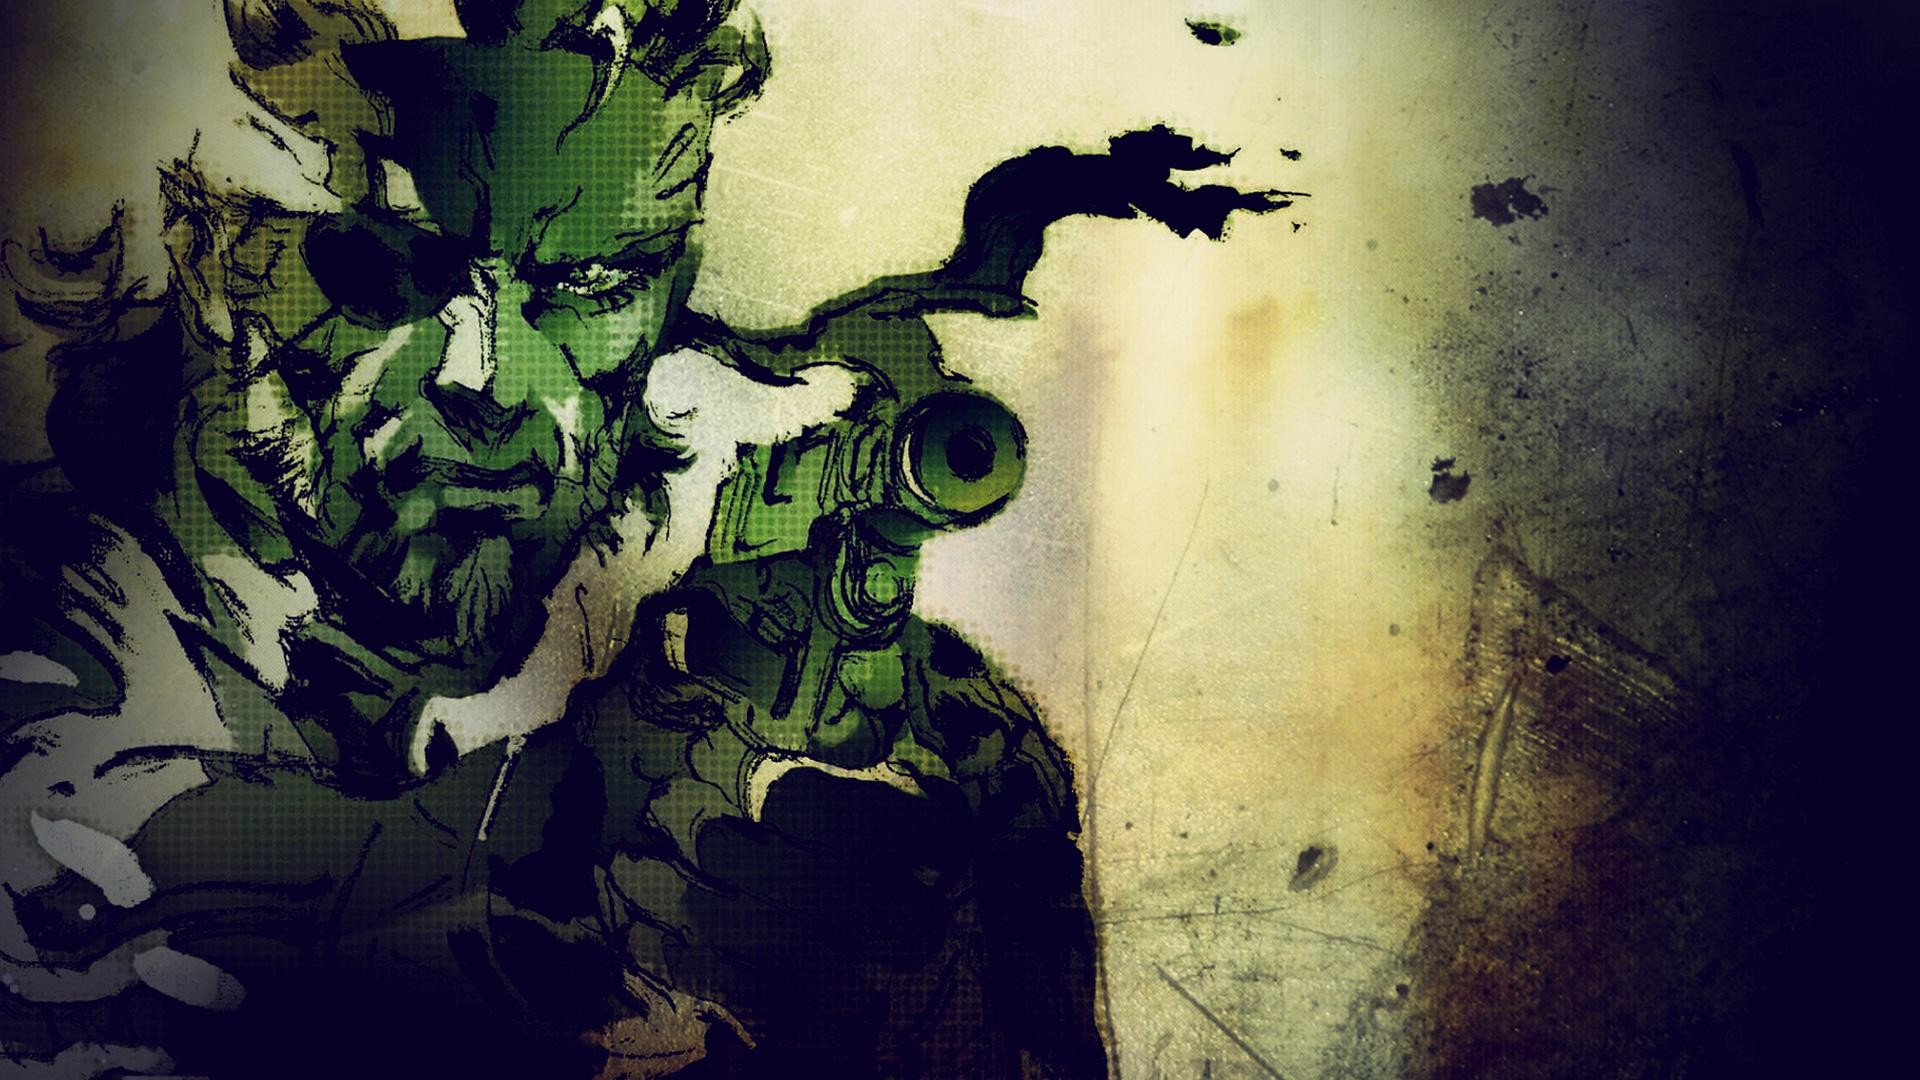 1920x1080 Mgs 3 Wallpapers (61 Wallpapers)